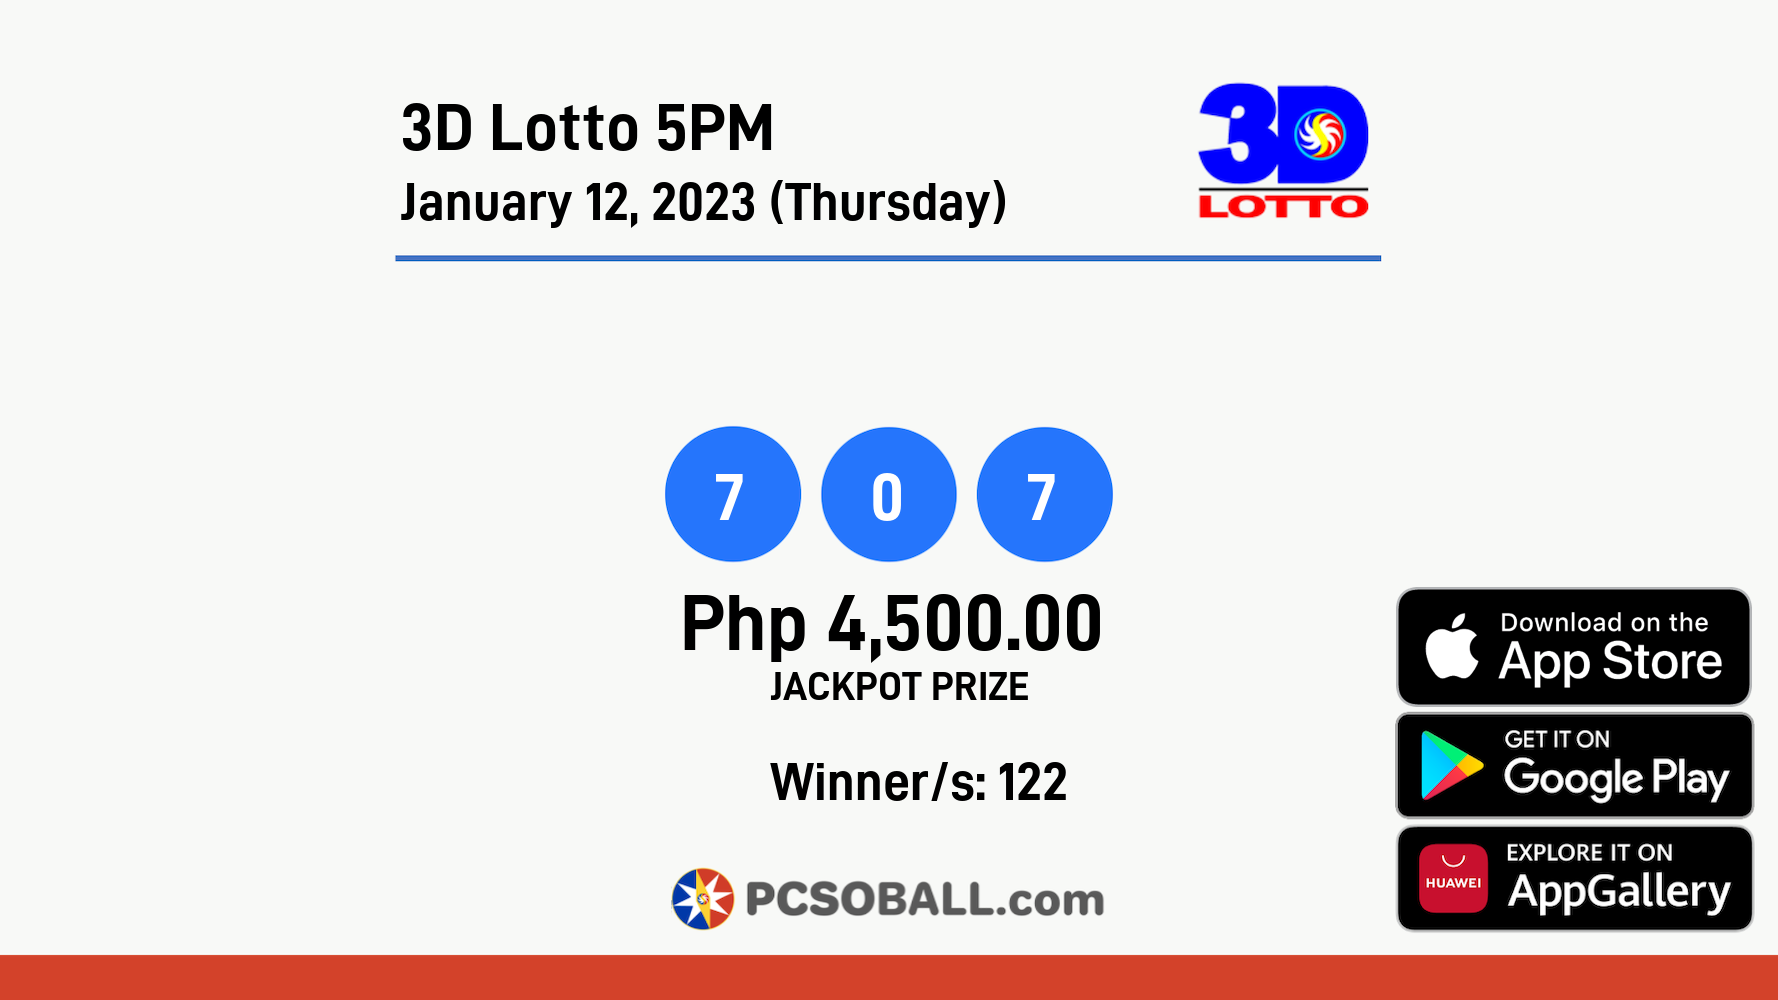 3D Lotto 5PM January 12, 2023 (Thursday) Result